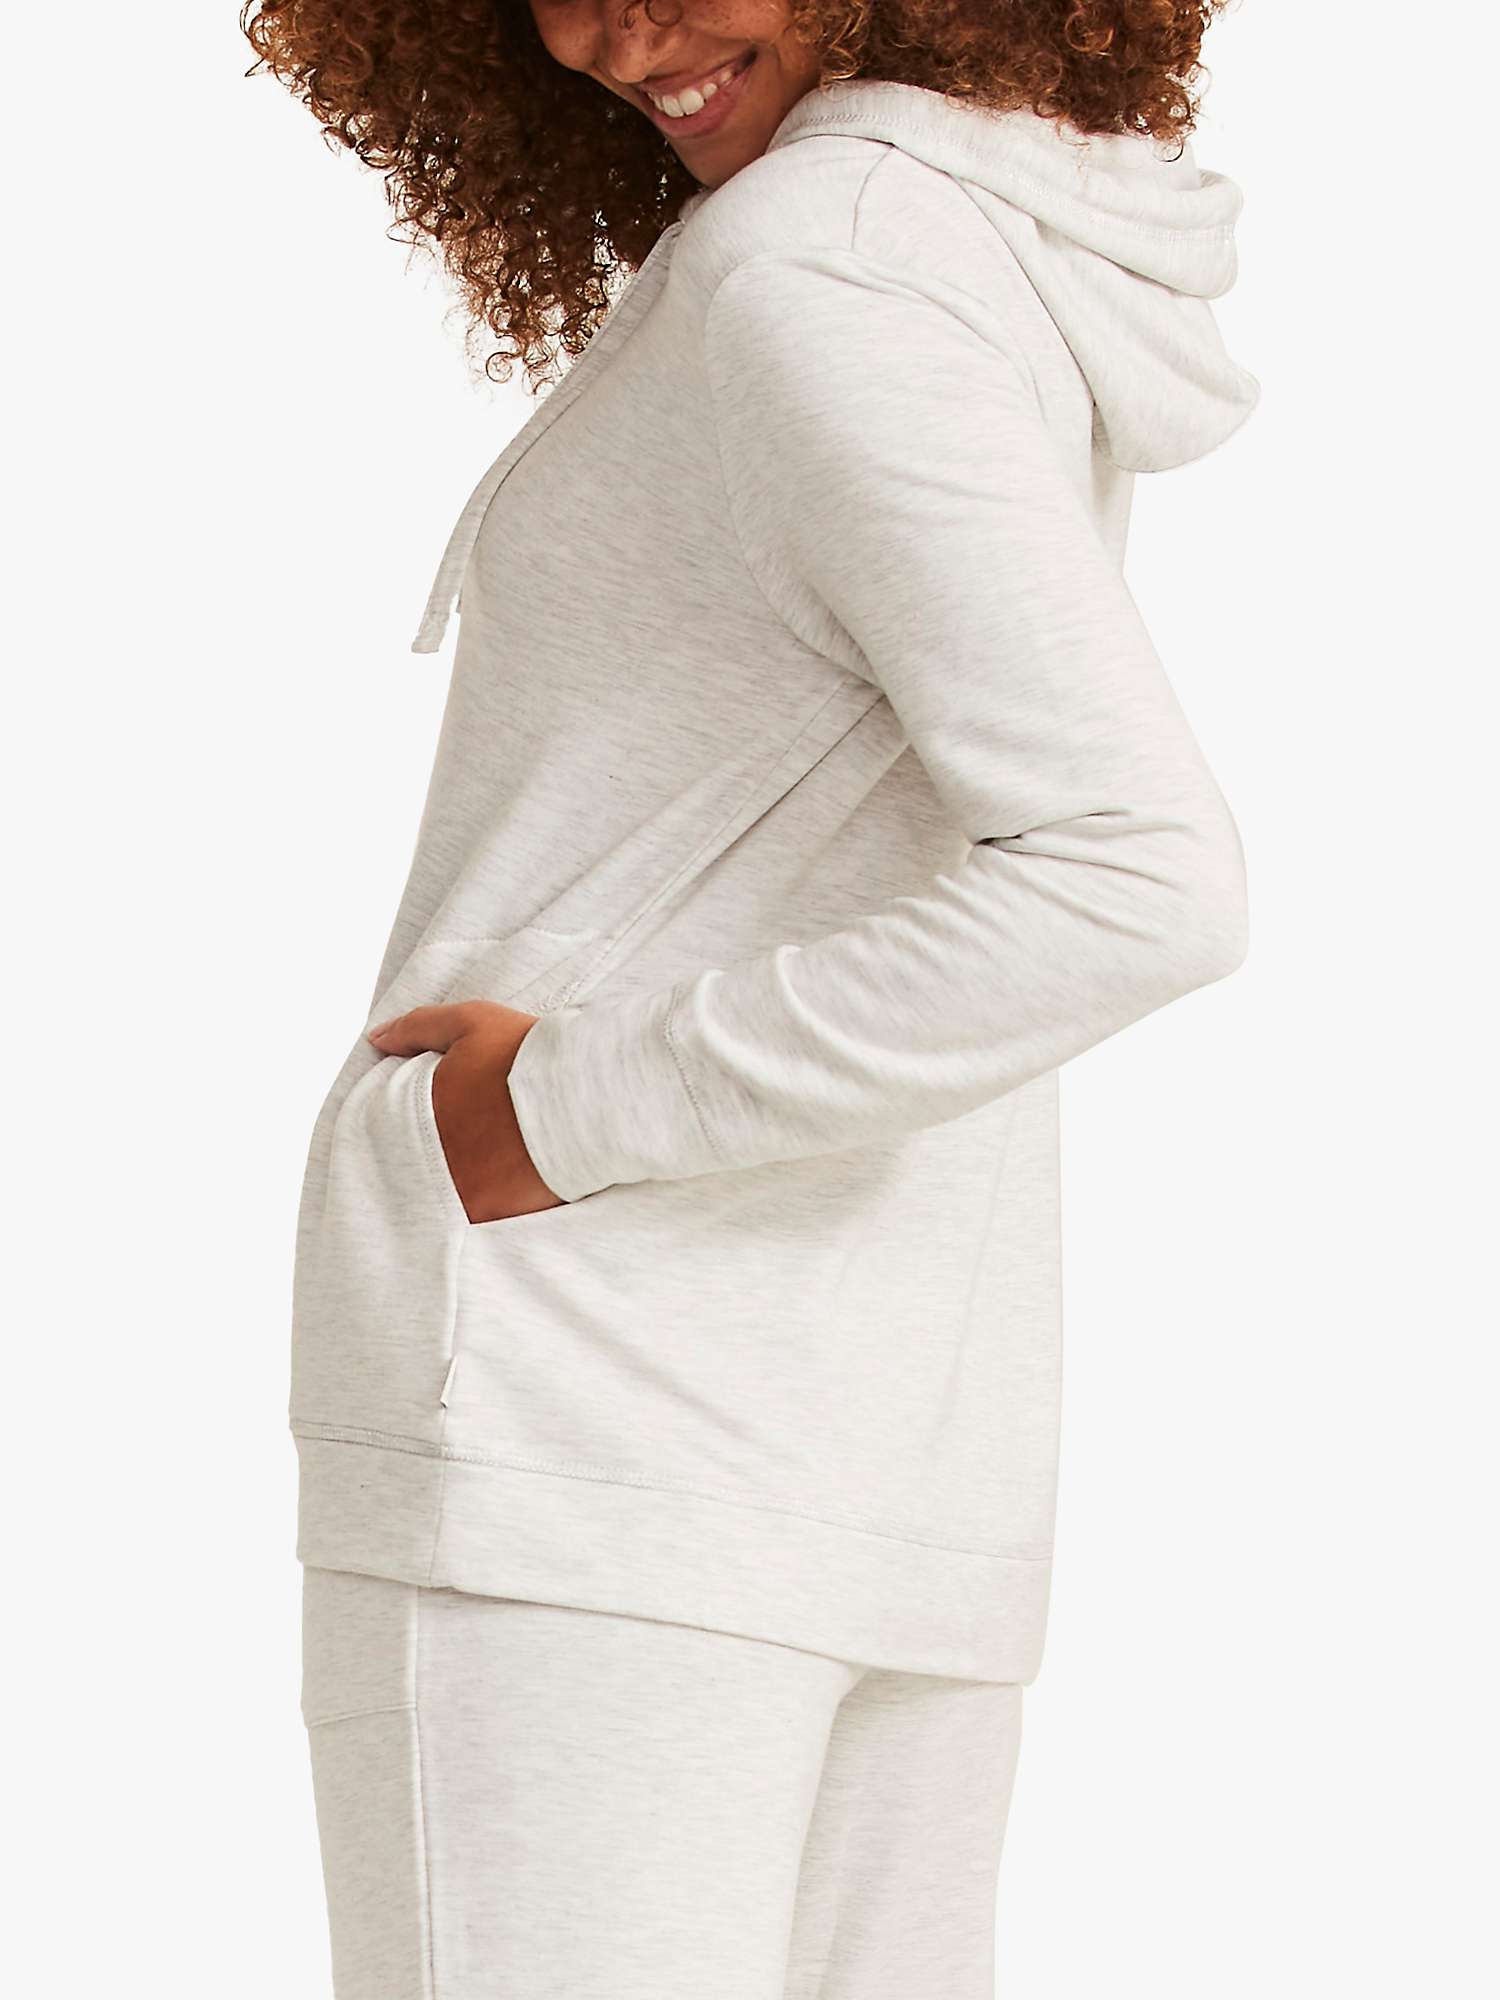 Buy FatFace Soft Hoodie, Grey Marl Online at johnlewis.com